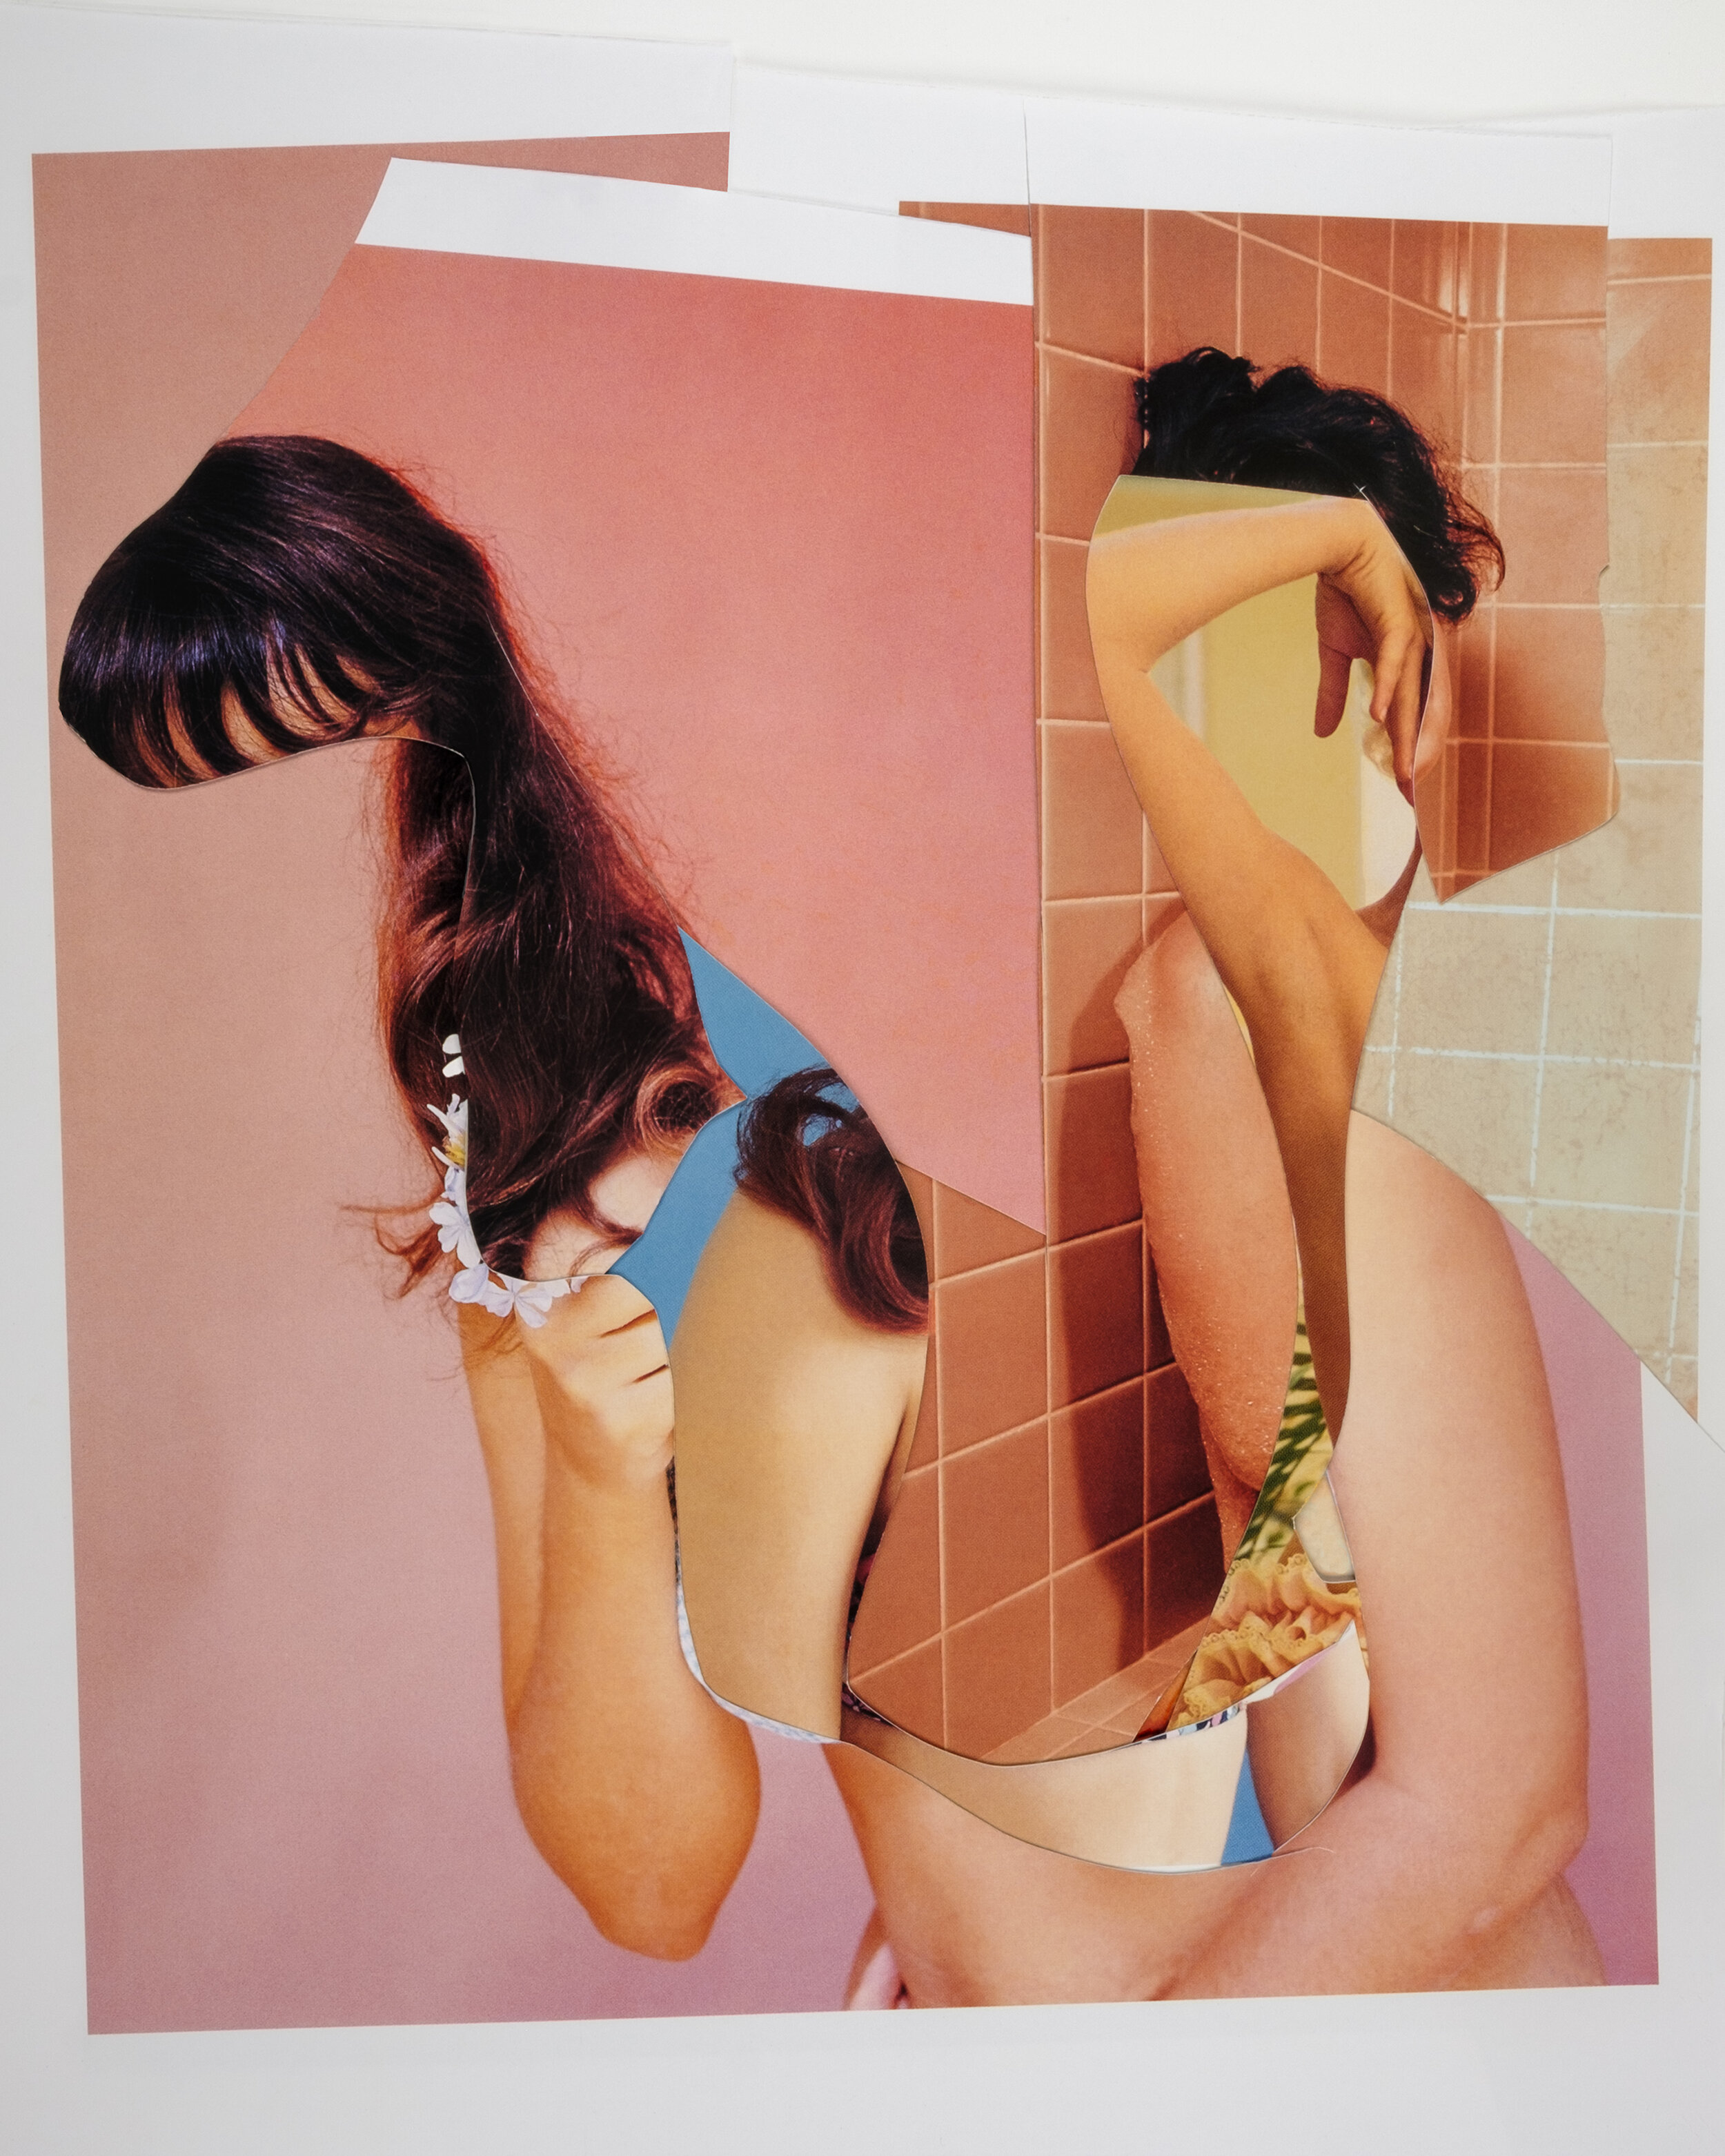 Pink Bathers_24 x 30 cm_UK_2019_K Young Collage.jpg